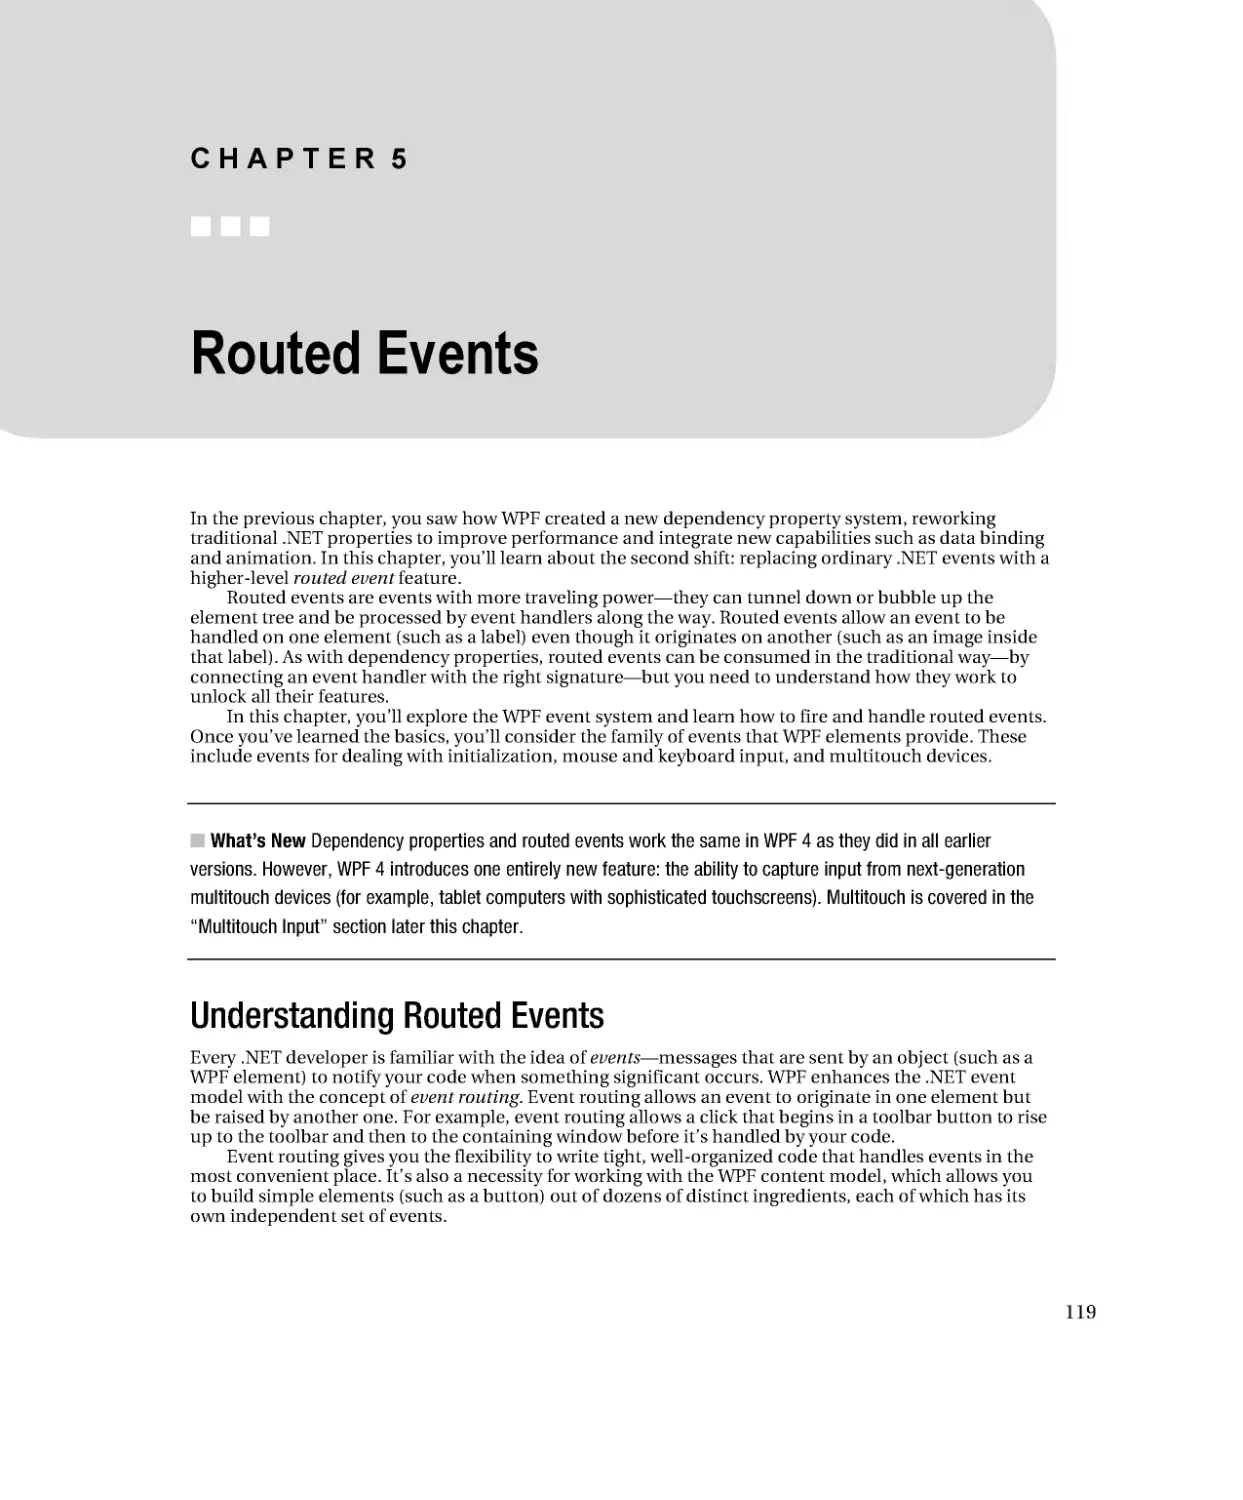 Routed Events